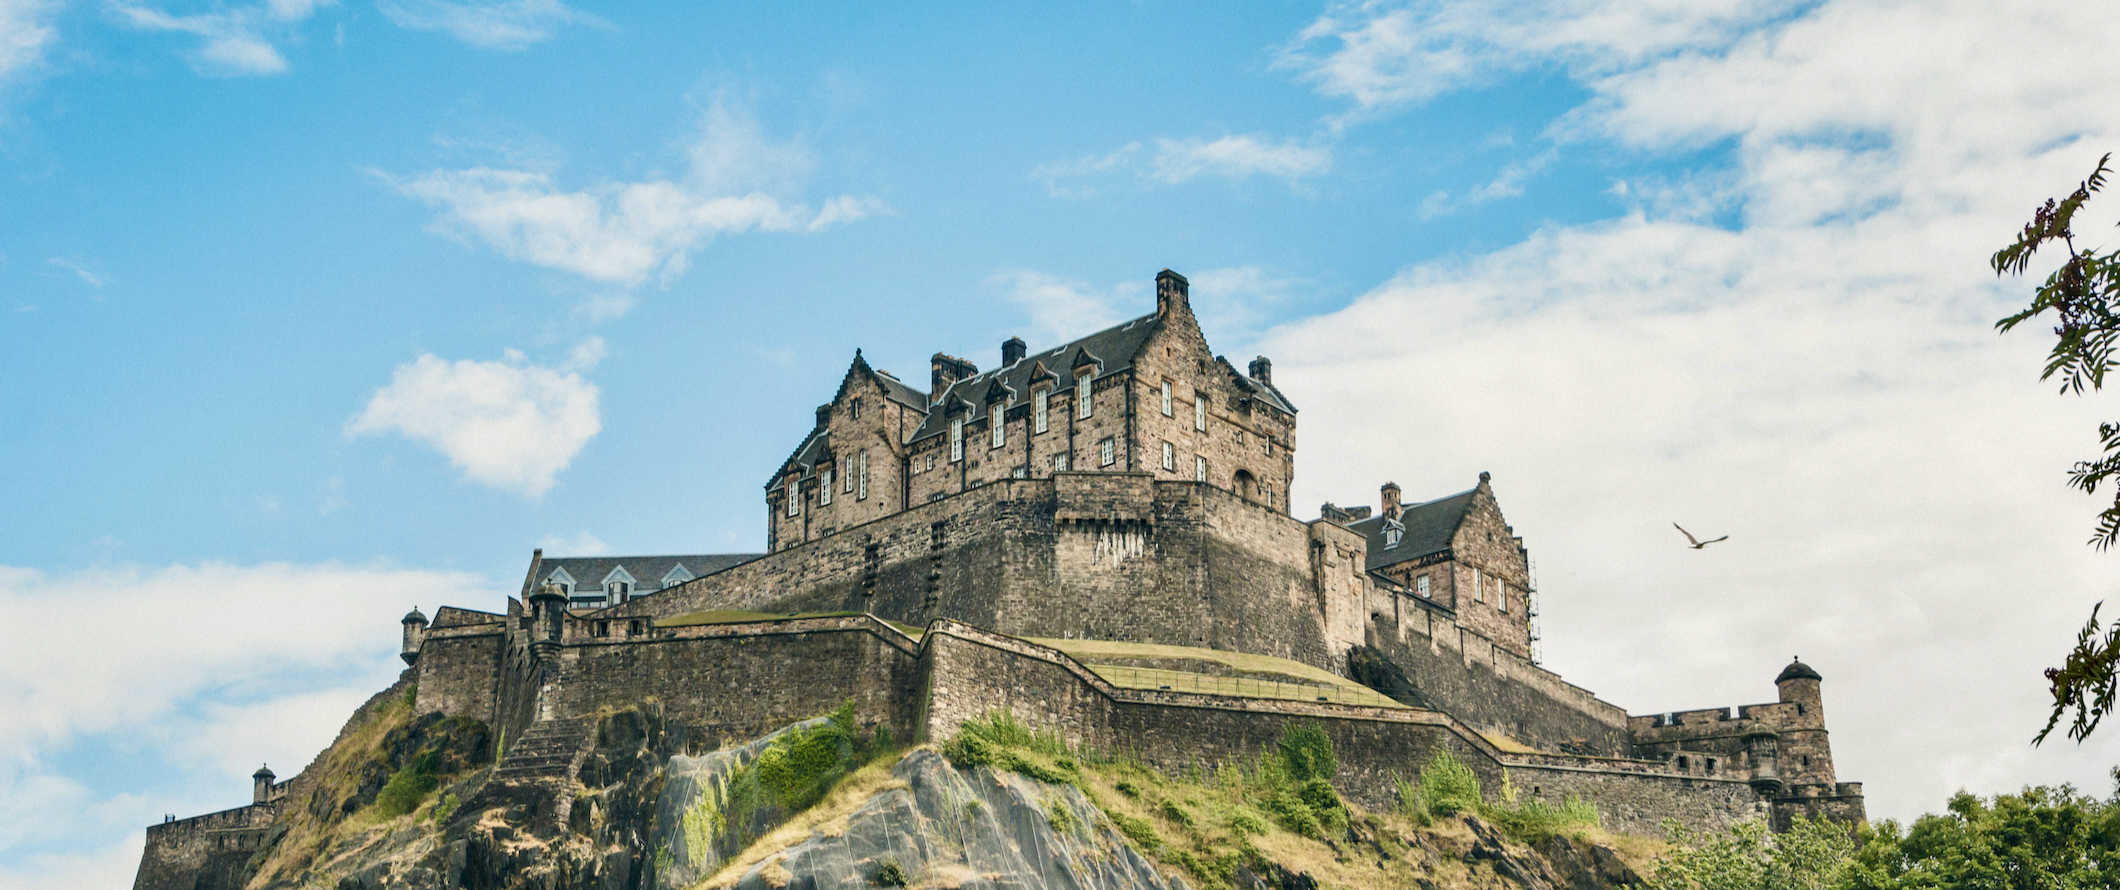 The historic Edinburgh Castle towering over the city on a sunny day